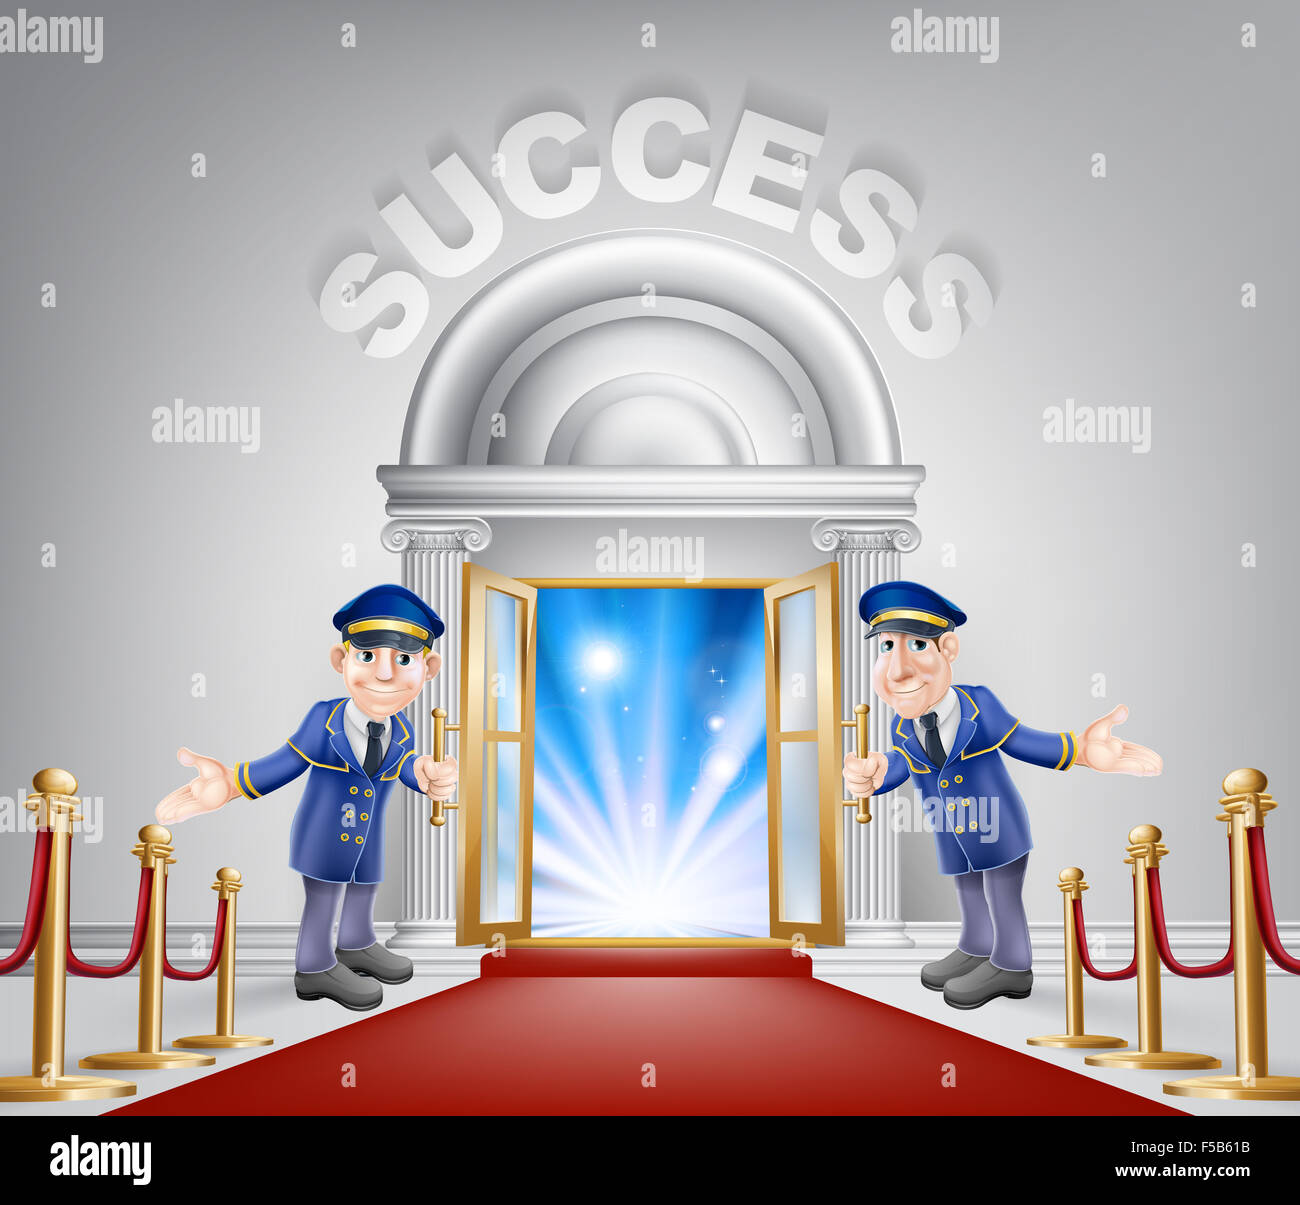 Success door concept of a doormen holding open a door at a red carpet entrance with velvet ropes. Light streaming through it, co Stock Photo